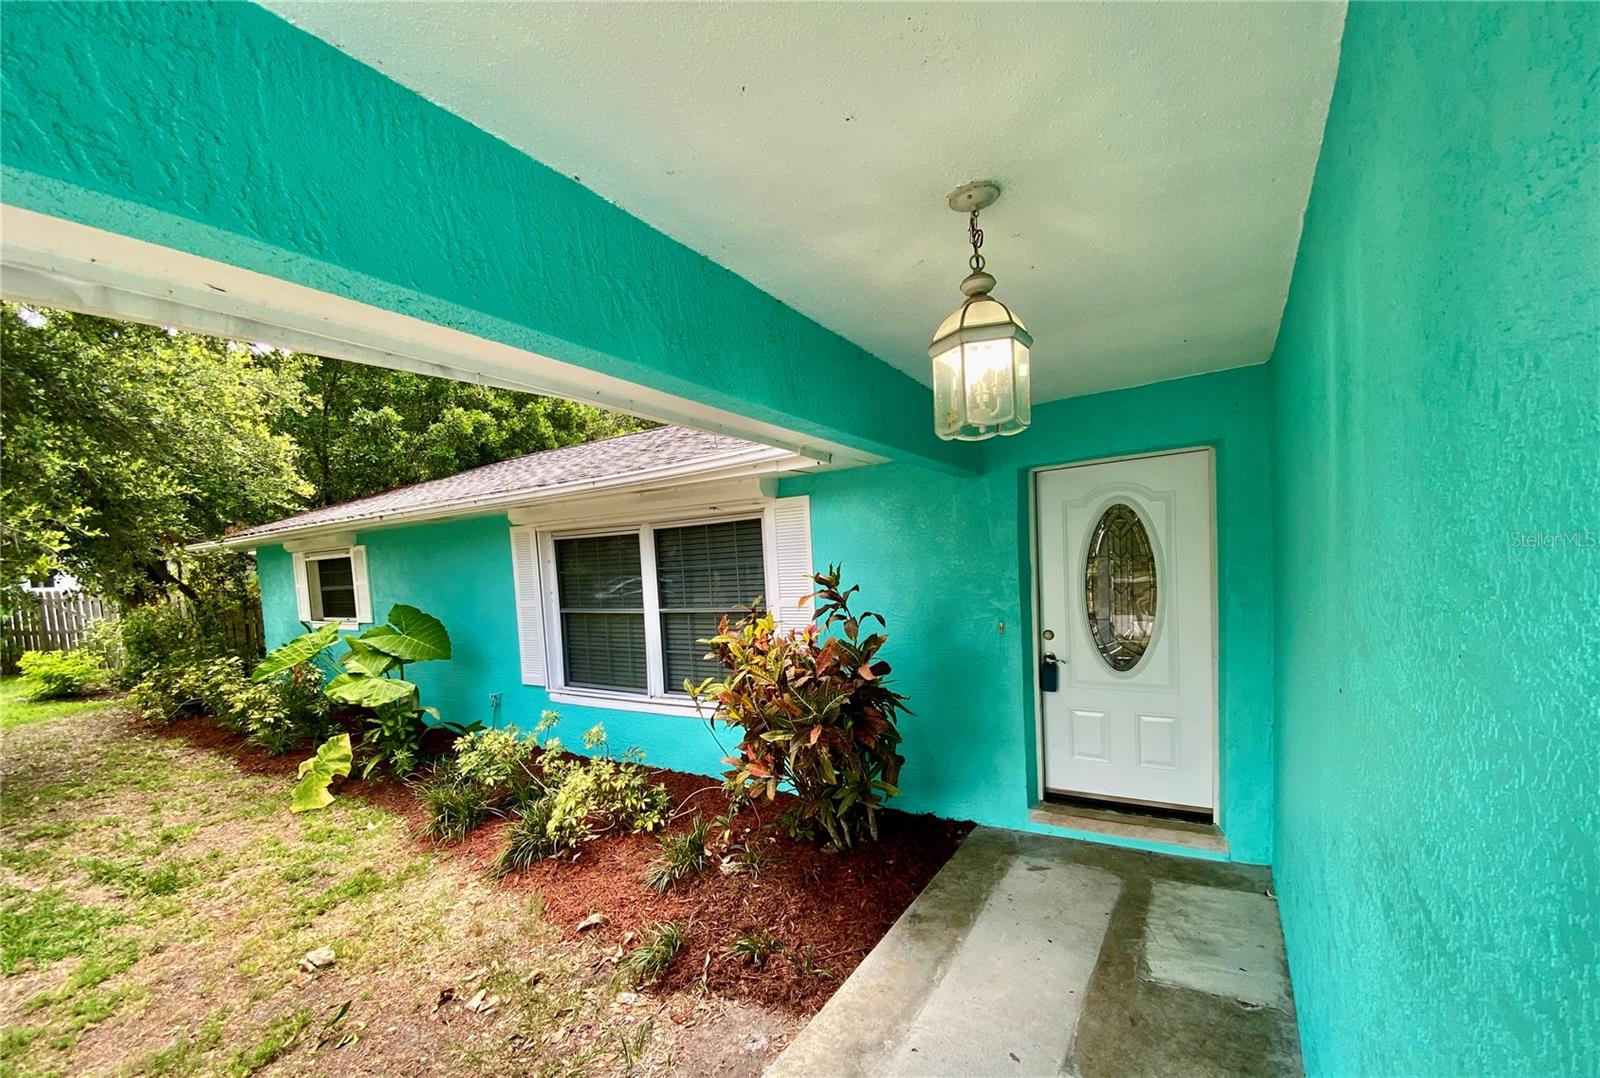 Freshly painted exterior in vibrant beachy color